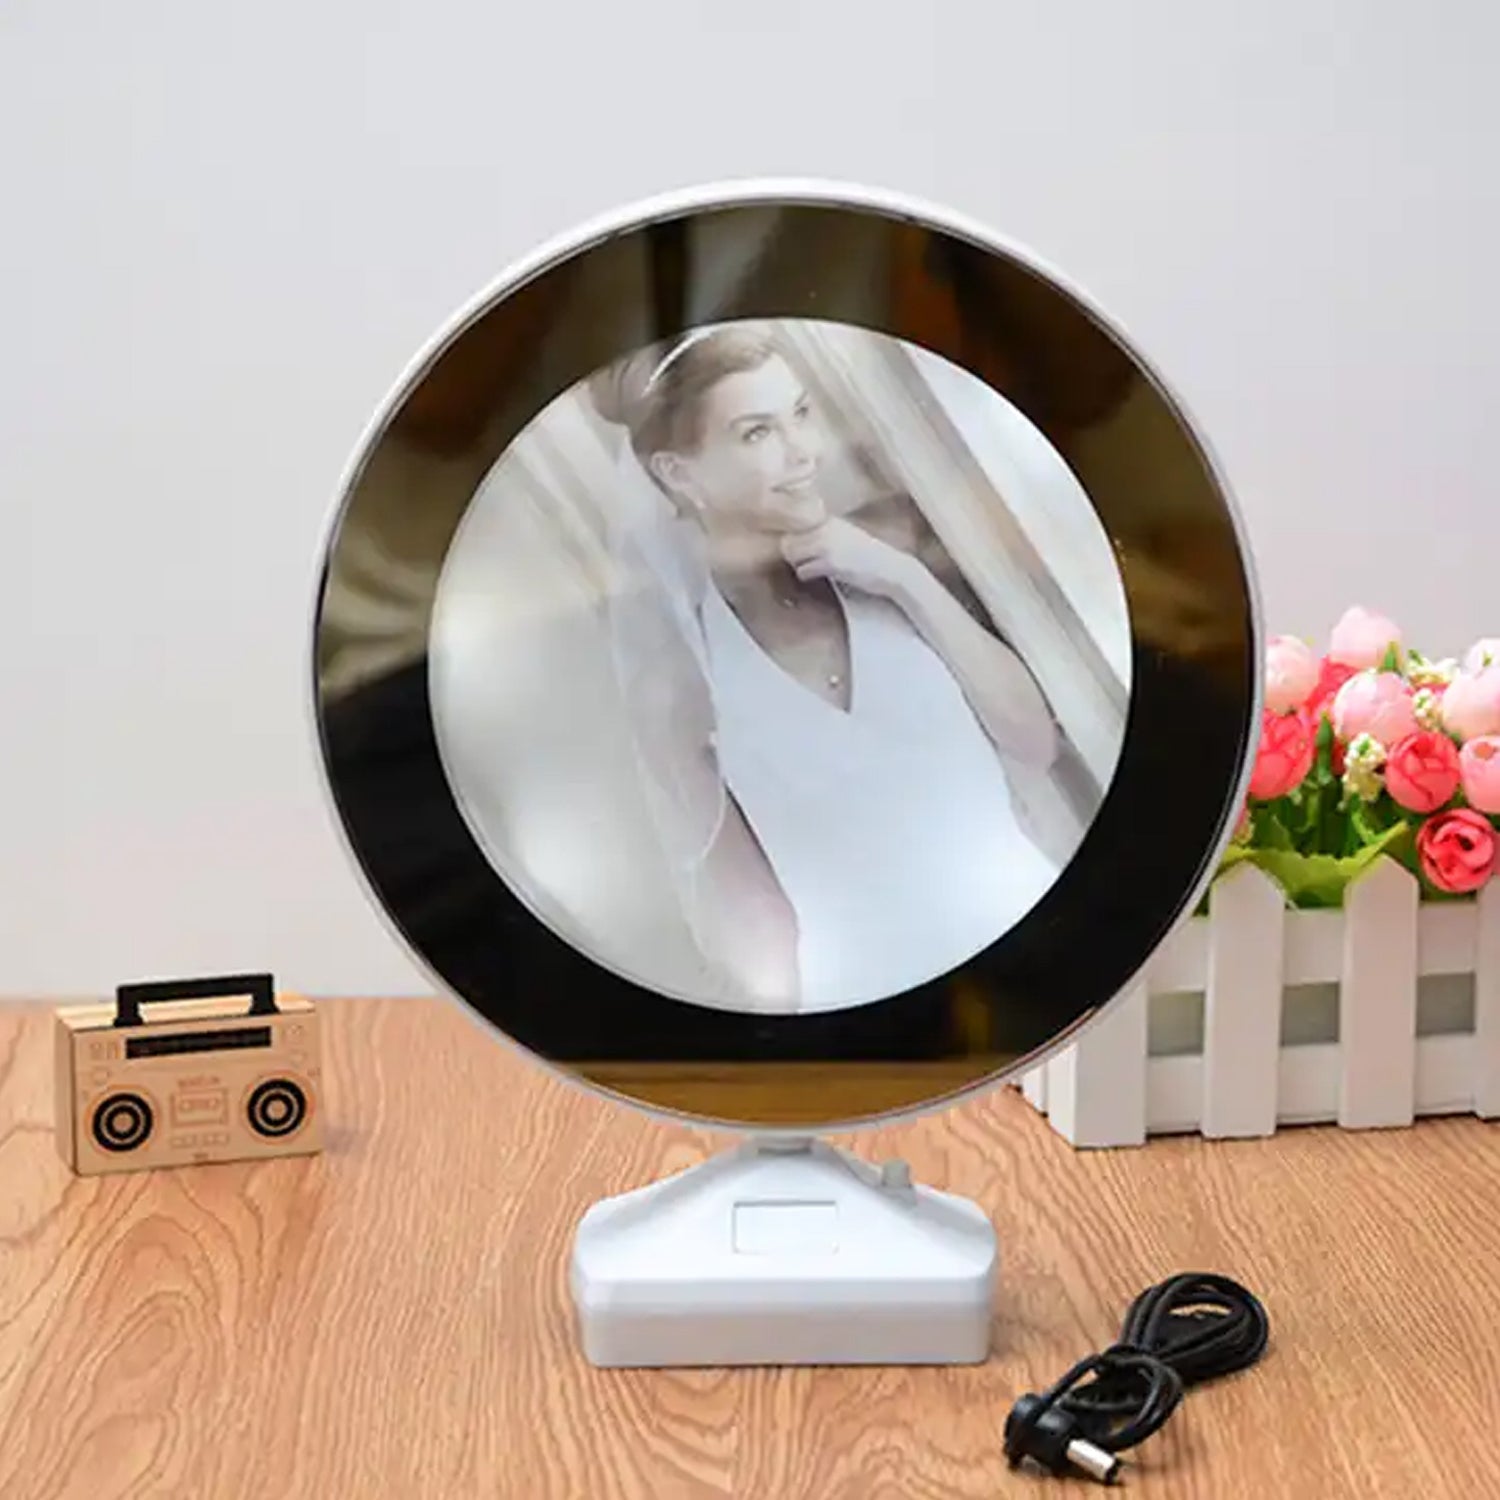 Plastic 2 in 1 Mirror Come Photo Frame with Led Light